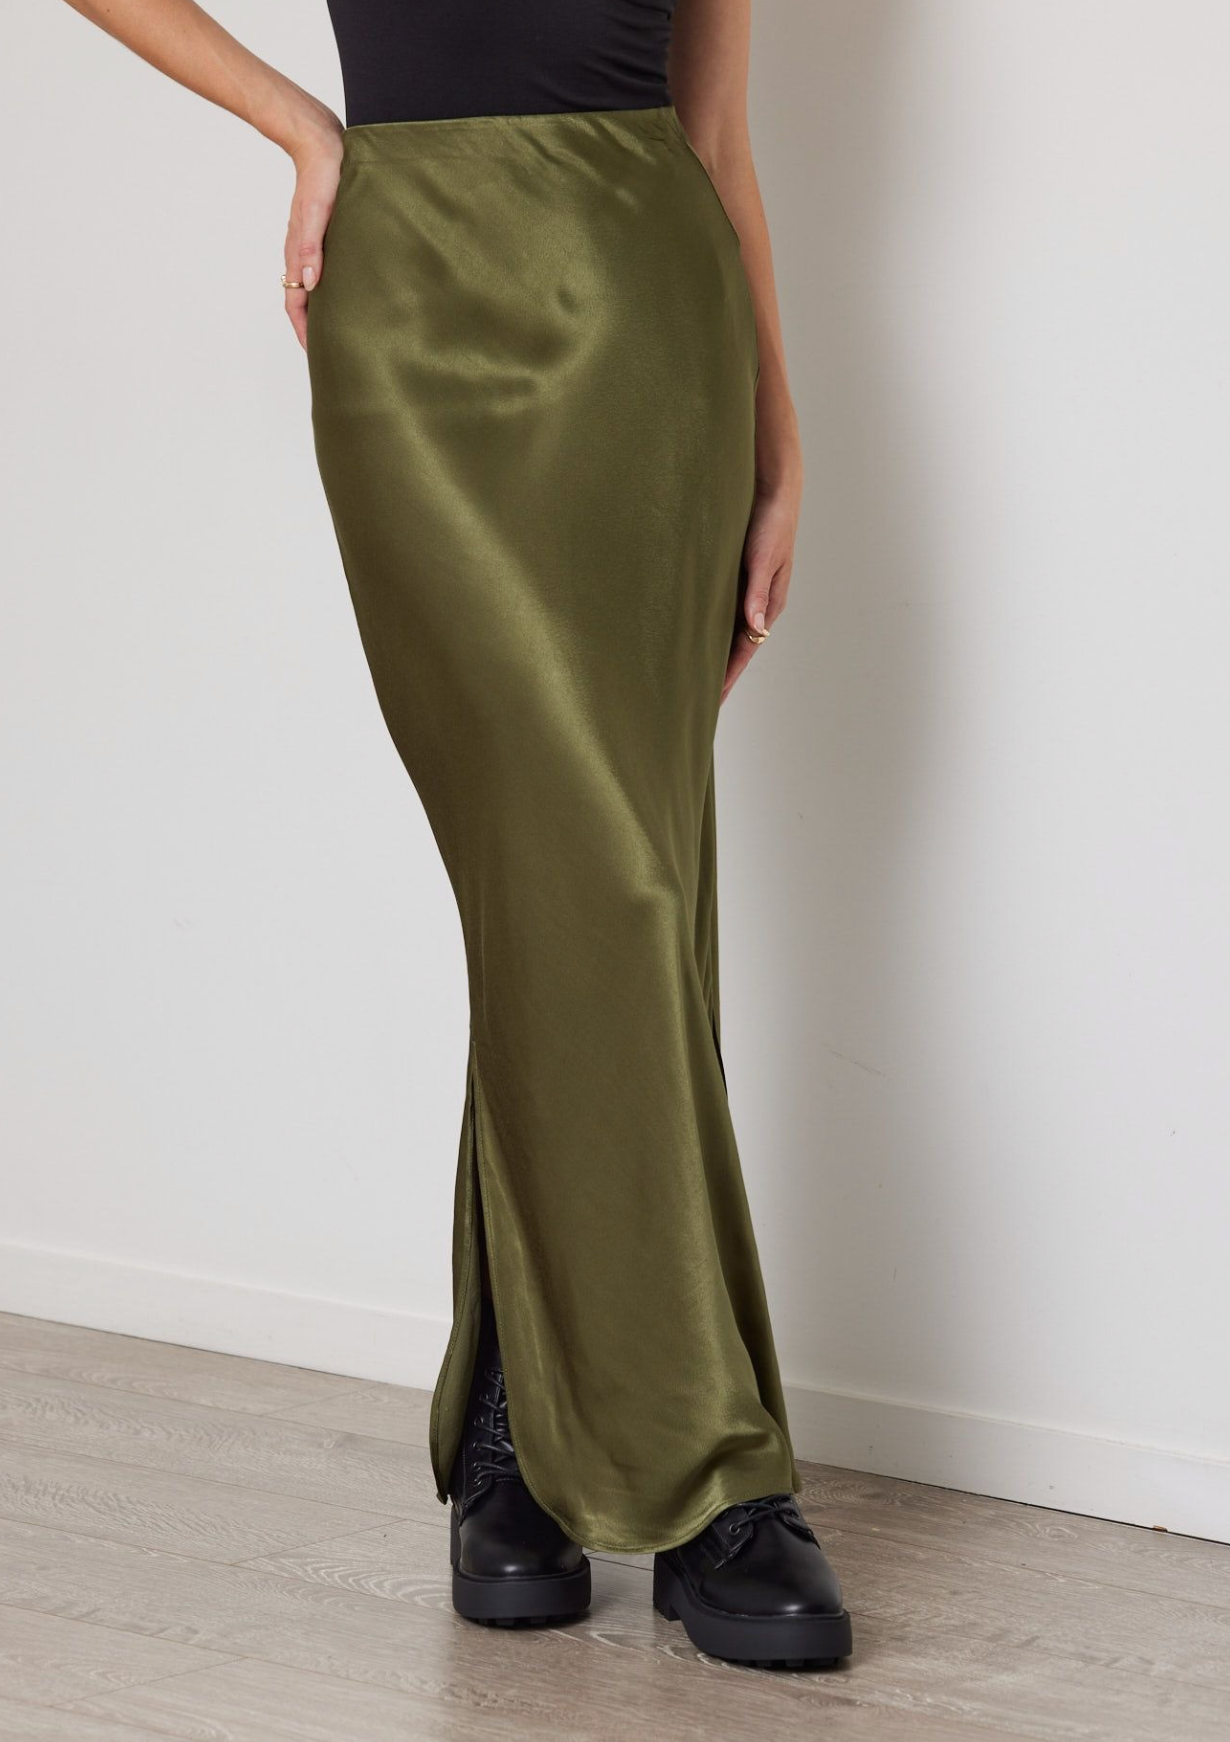 DUO REINE BIAS SKIRT - OLIVE - THE VOGUE STORE